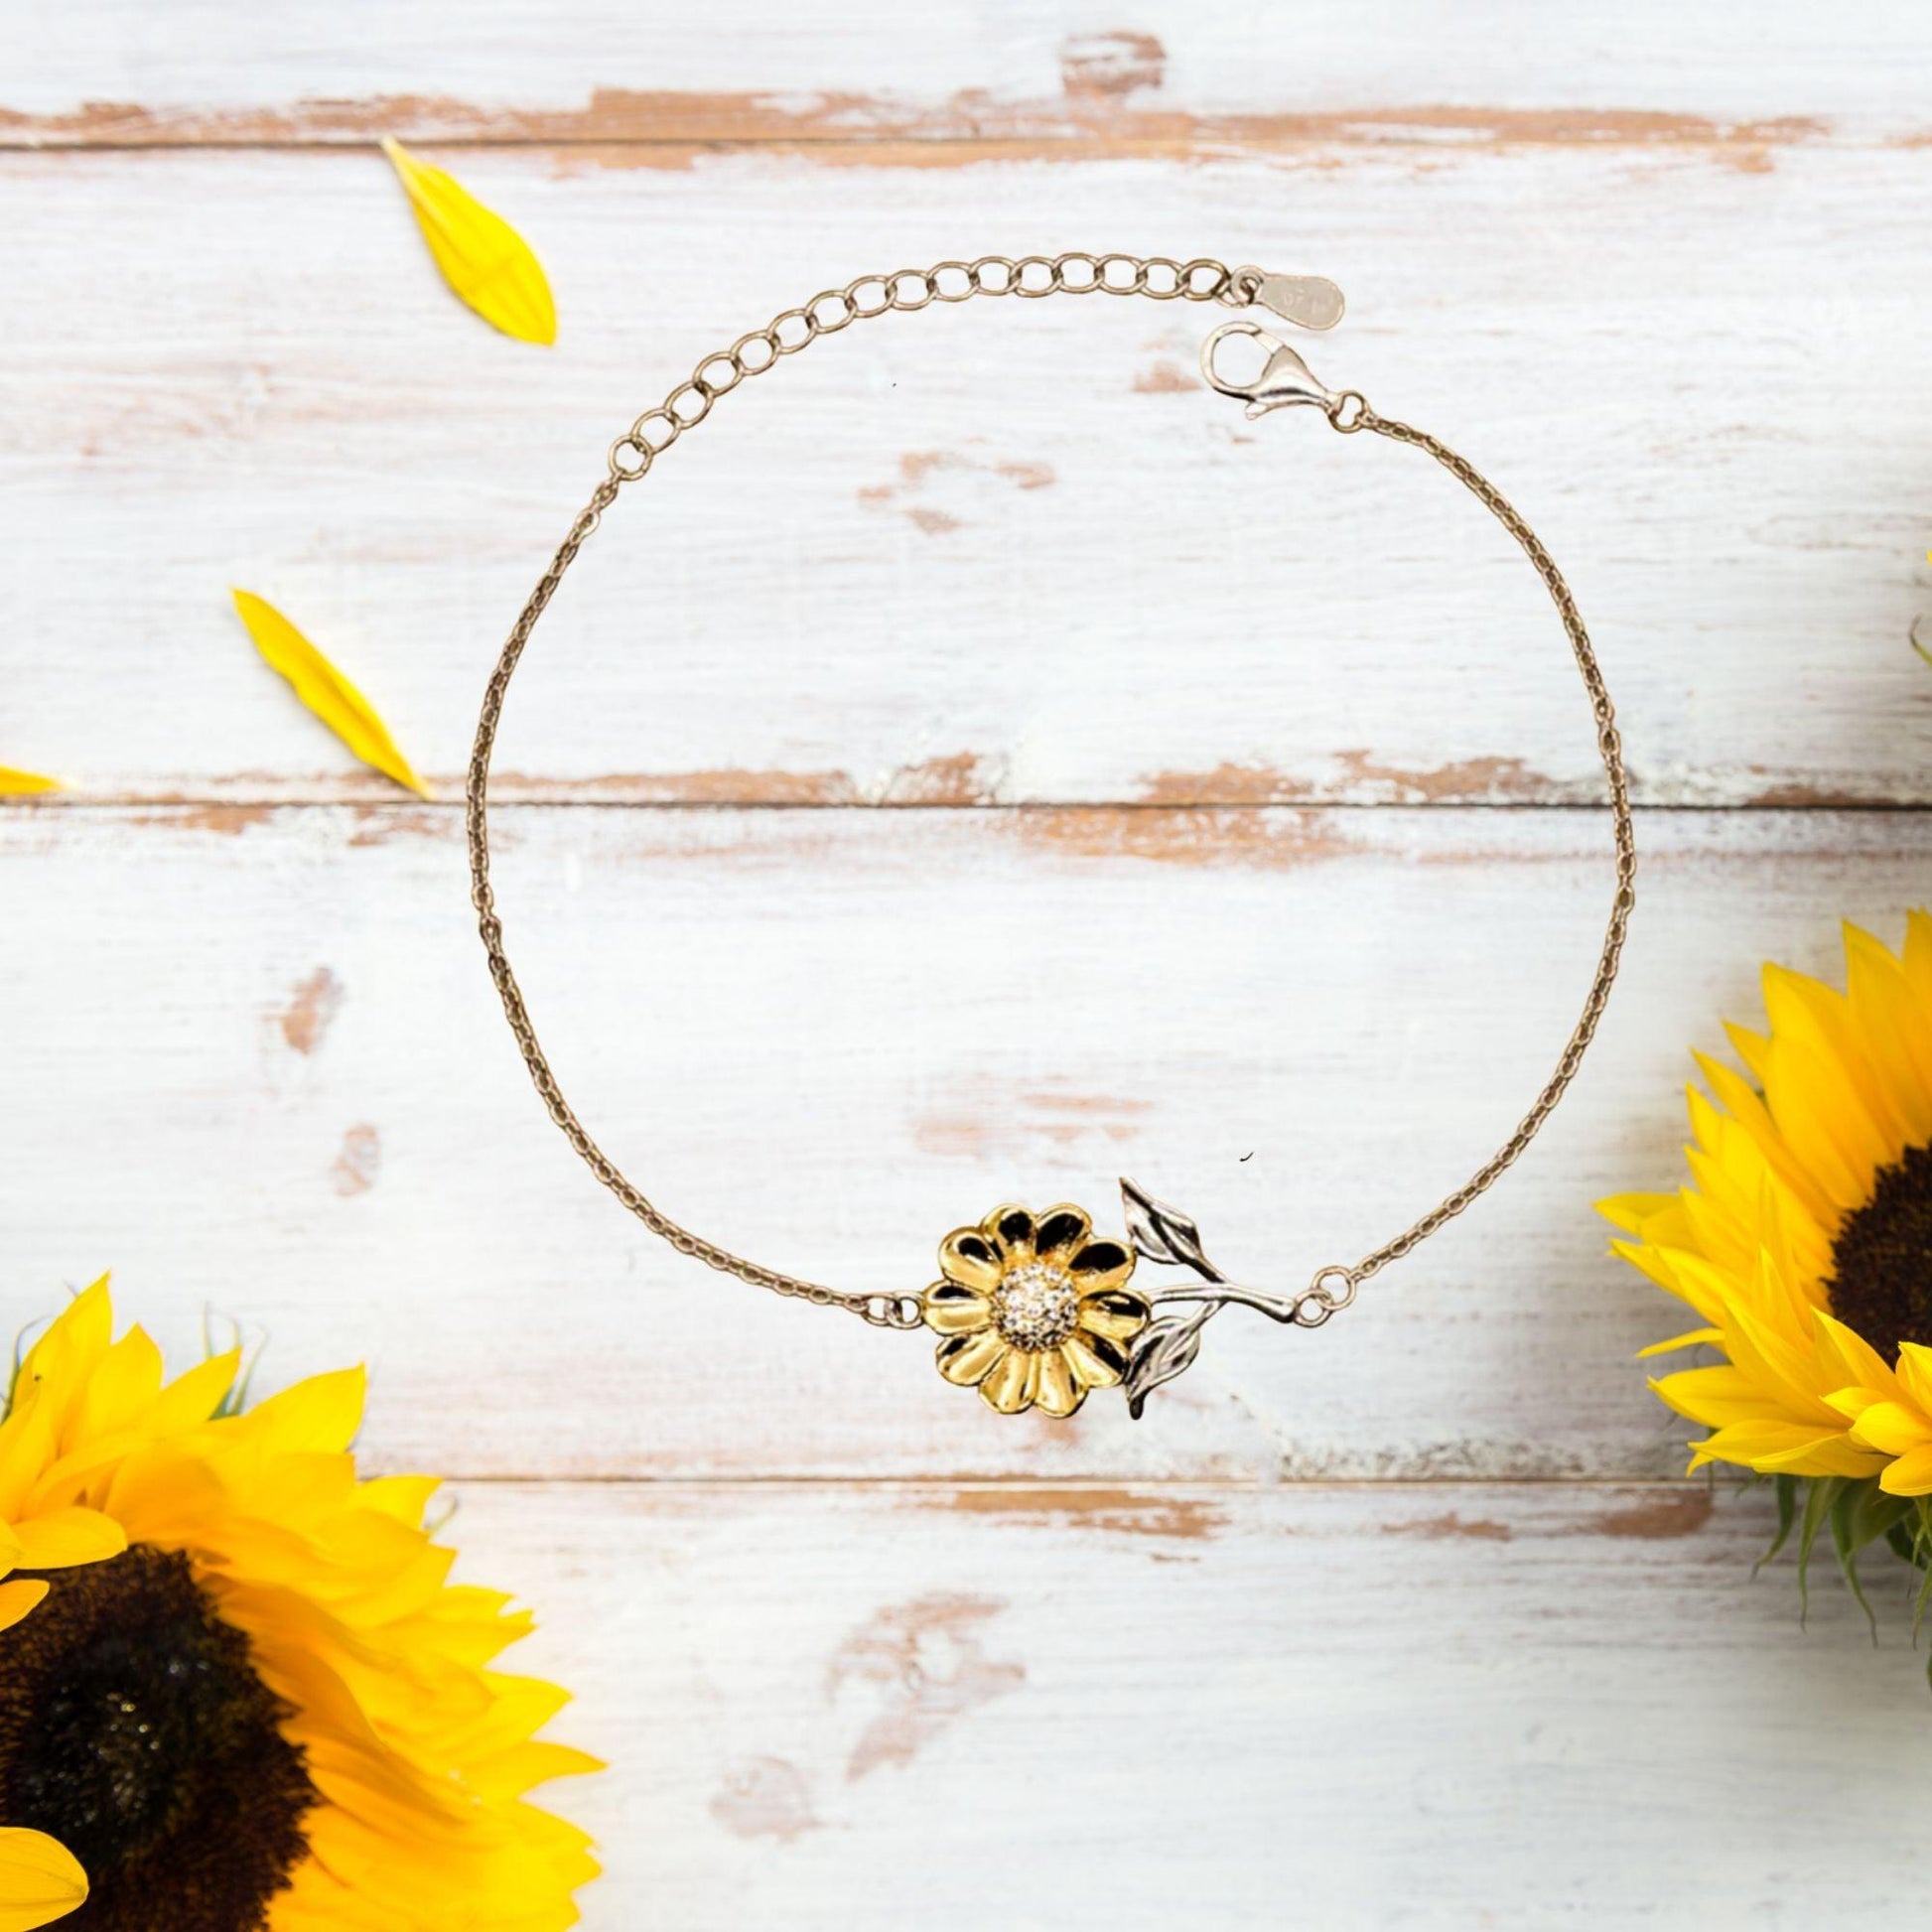 Missionary Sunflower Bracelet - Thanks for being who you are - Birthday Christmas Jewelry Gifts Coworkers Colleague Boss - Mallard Moon Gift Shop